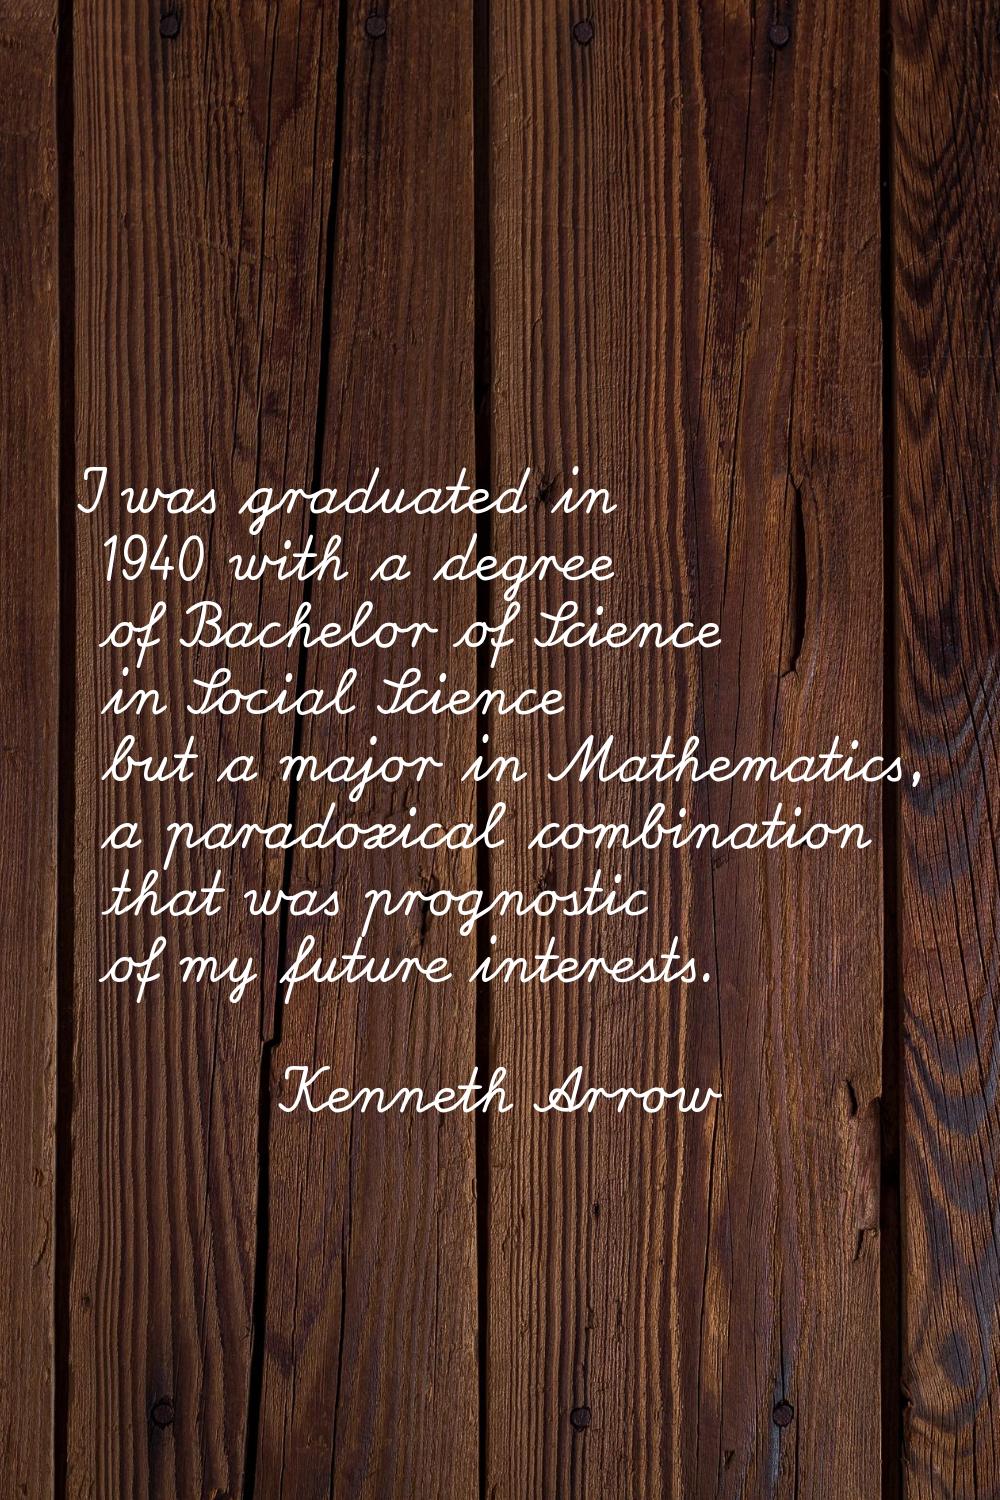 I was graduated in 1940 with a degree of Bachelor of Science in Social Science but a major in Mathe